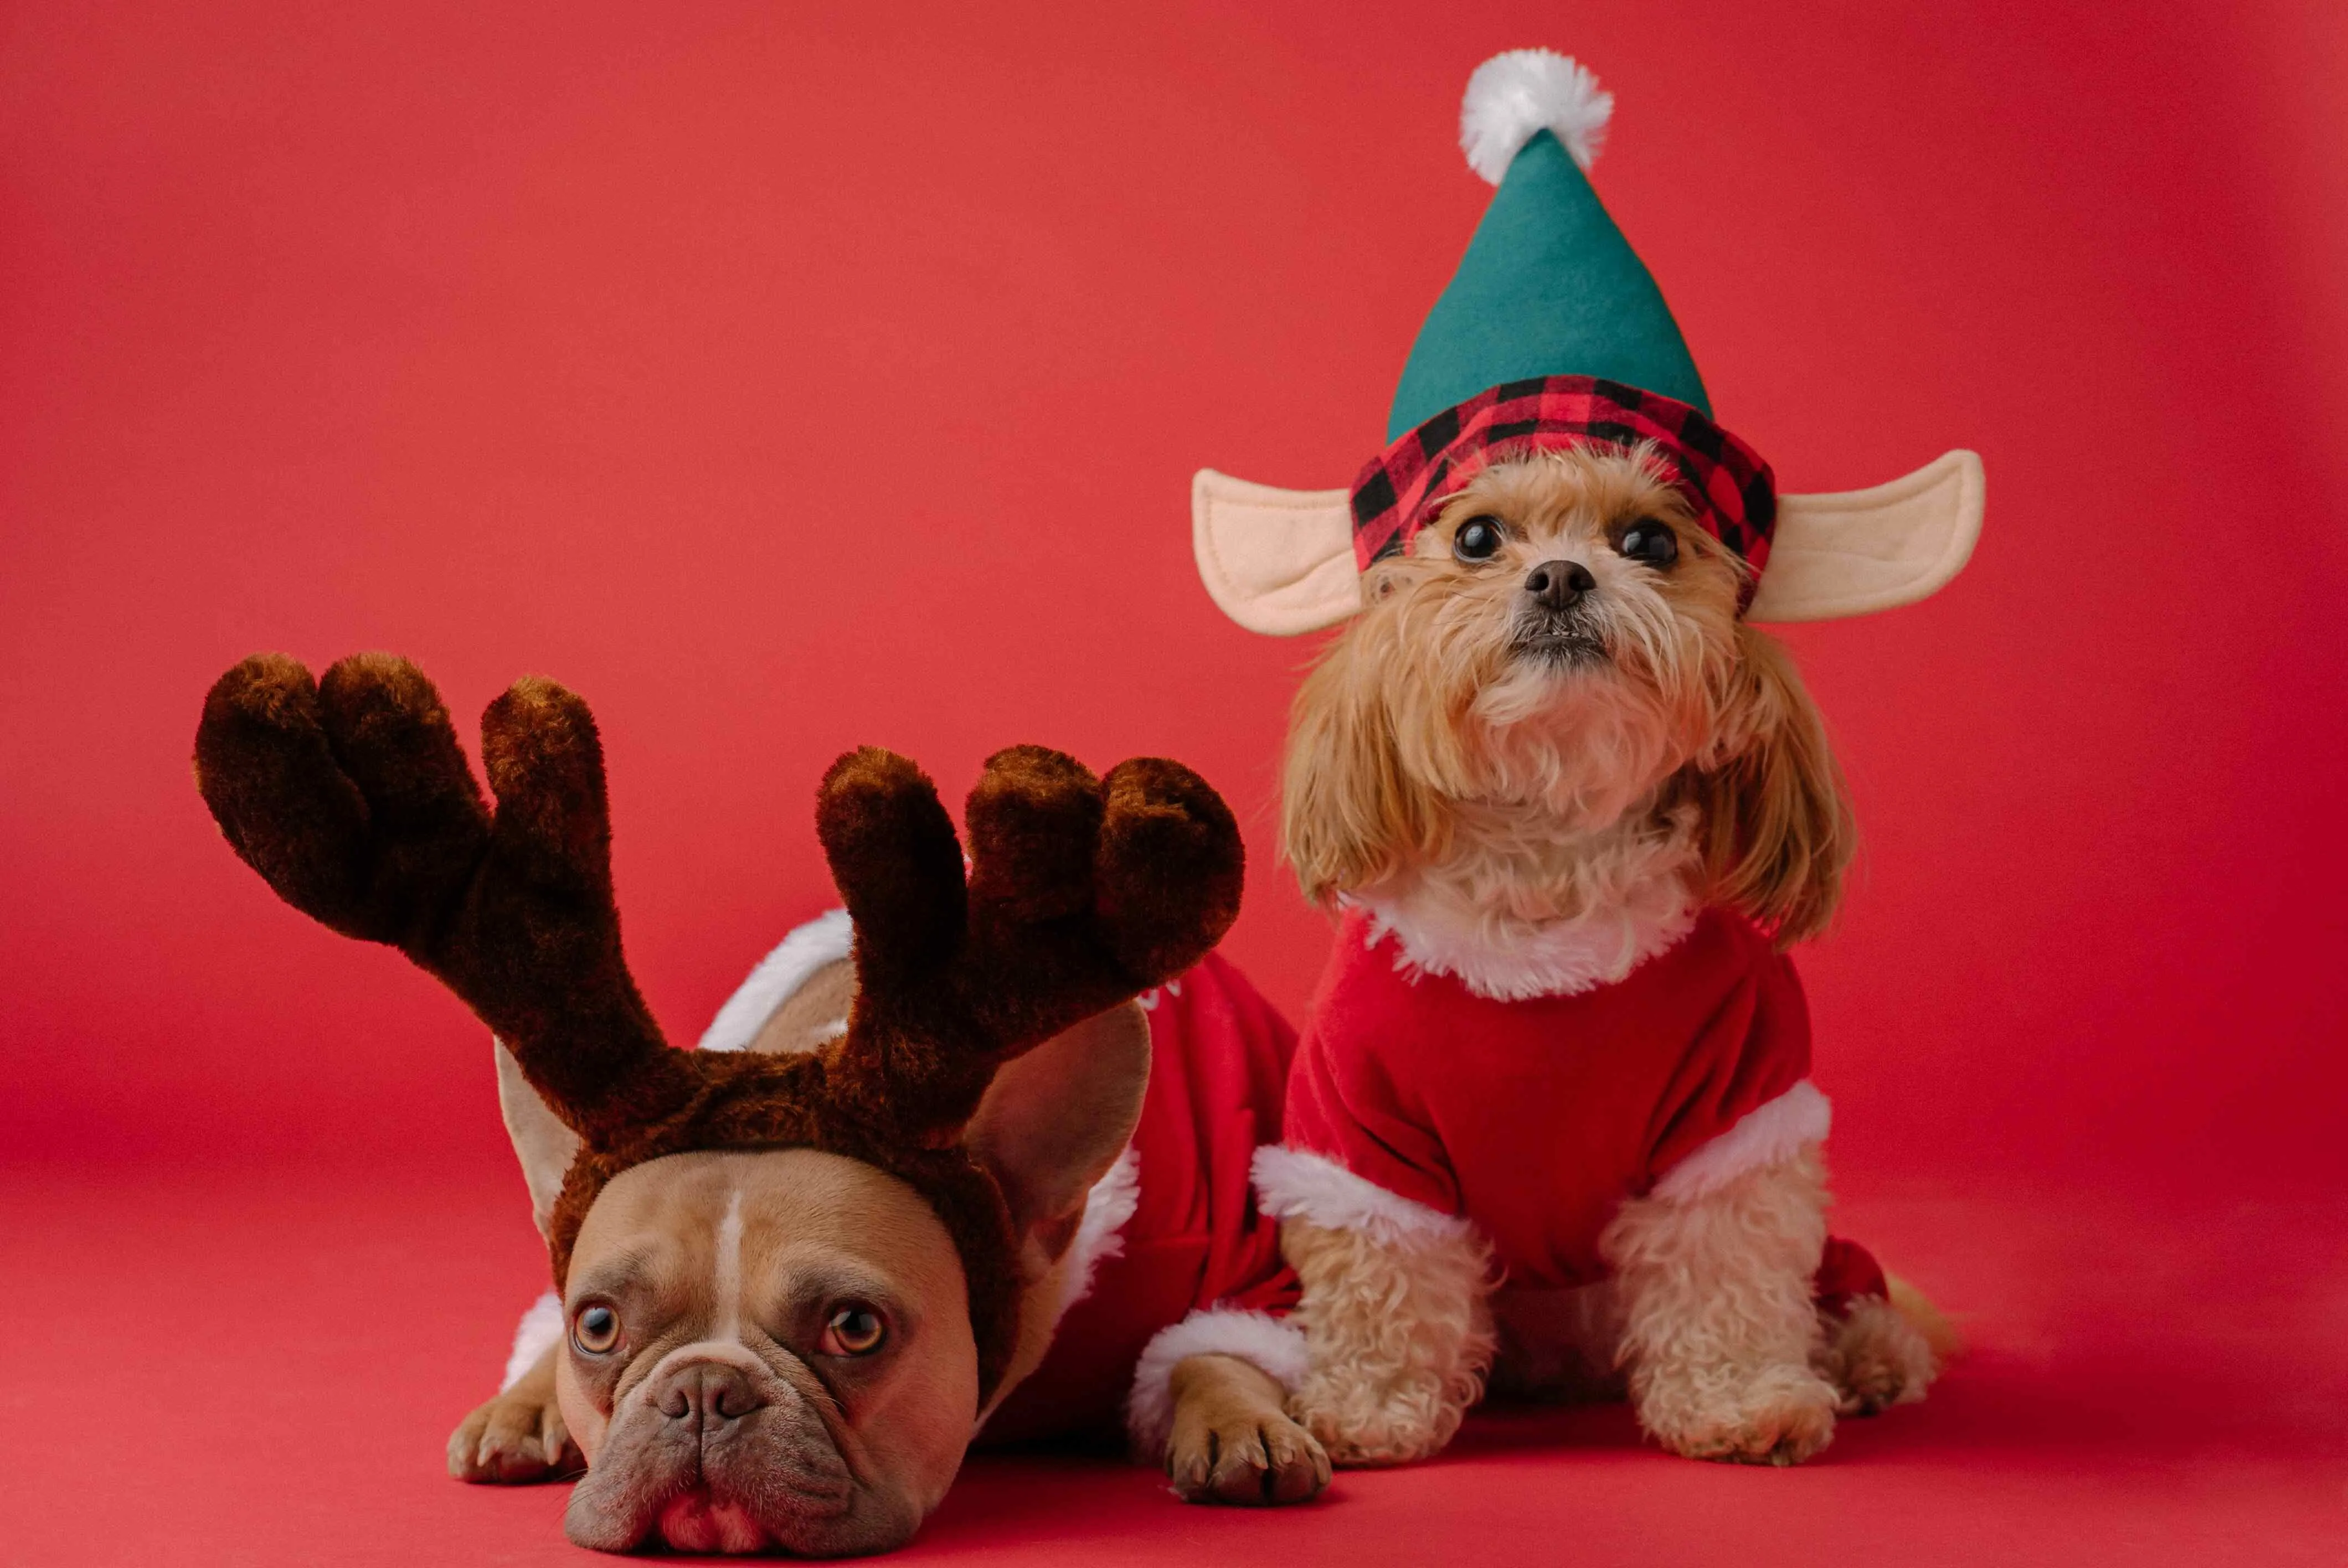 Christmas names for pets during the holiday season are inspired by winter dog names.